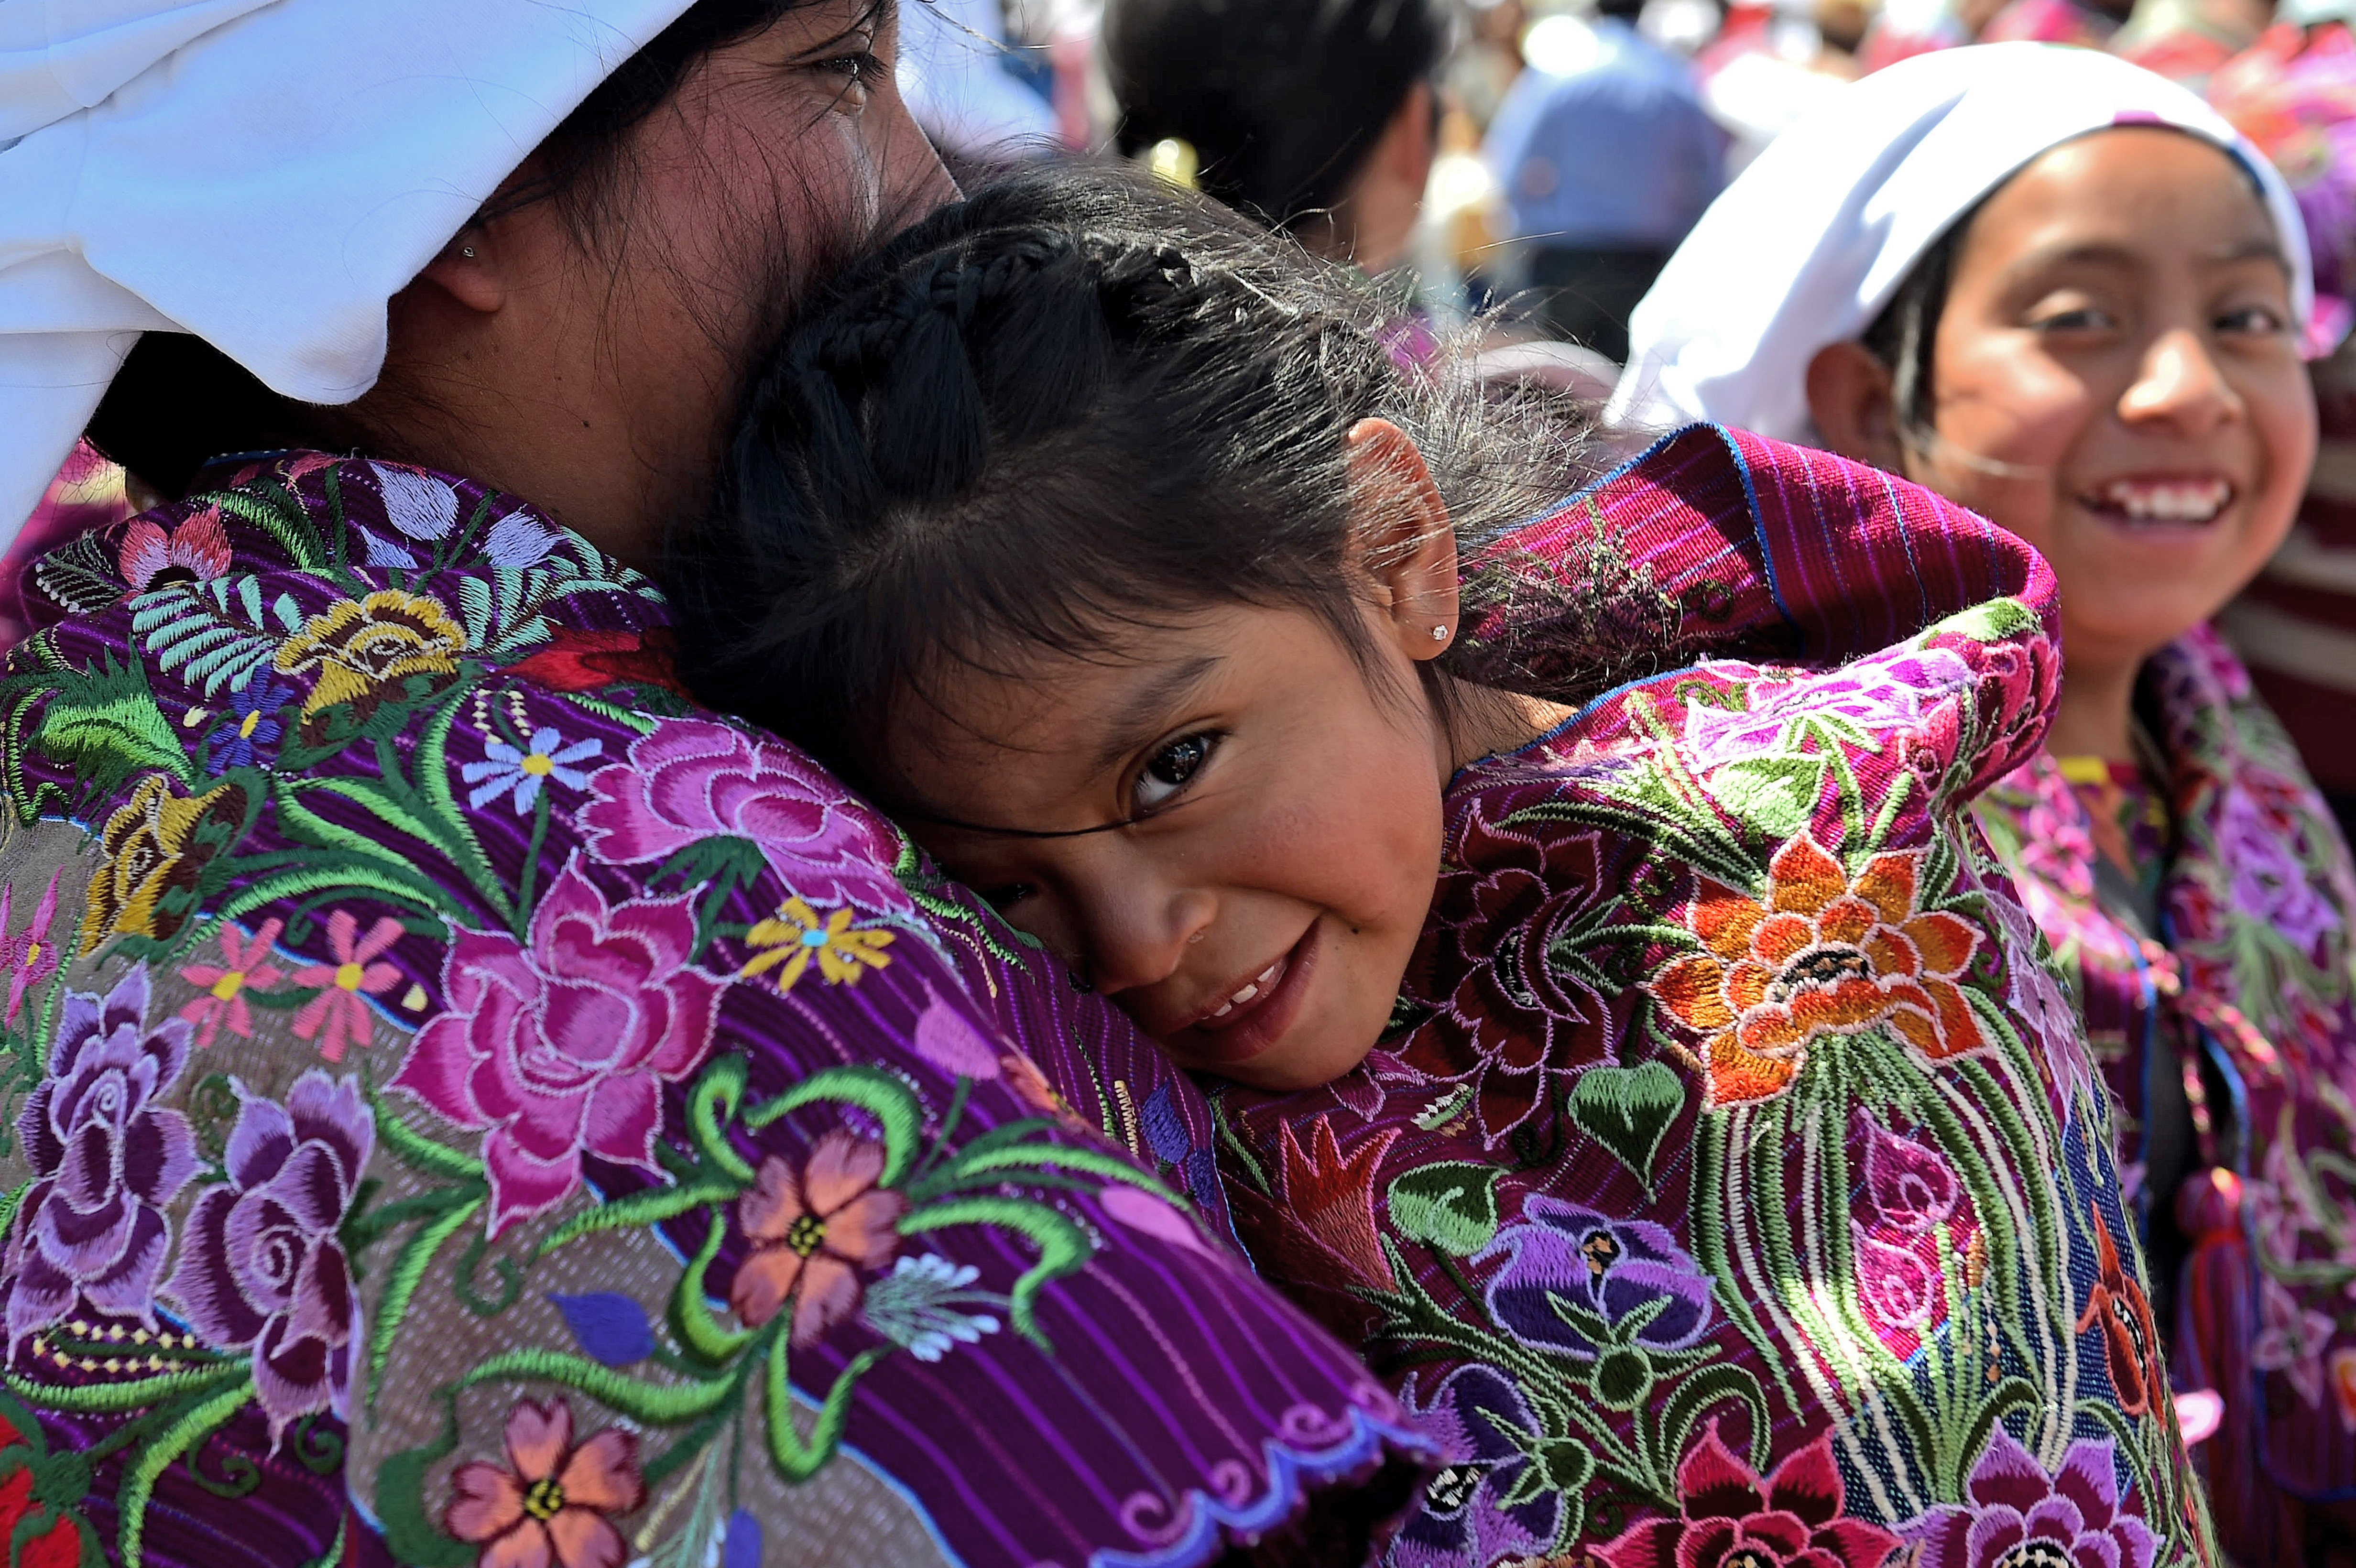 A young girl attends a mass celebrated by Pope Francis with representatives of the indigenous communities of Chiapas in the municipal sport center in San Cristobal de Las Casas, Chiapas, Mexico on February 15, 2016. Pope Francis reached out to Mexico's long-marginalized indigenous population on Monday, asking for forgiveness over their exclusion as he celebrated an open-air mass in native languages in impoverished Chiapas state.   AFP PHOTO / GABRIEL BOUYS / AFP / GABRIEL BOUYS